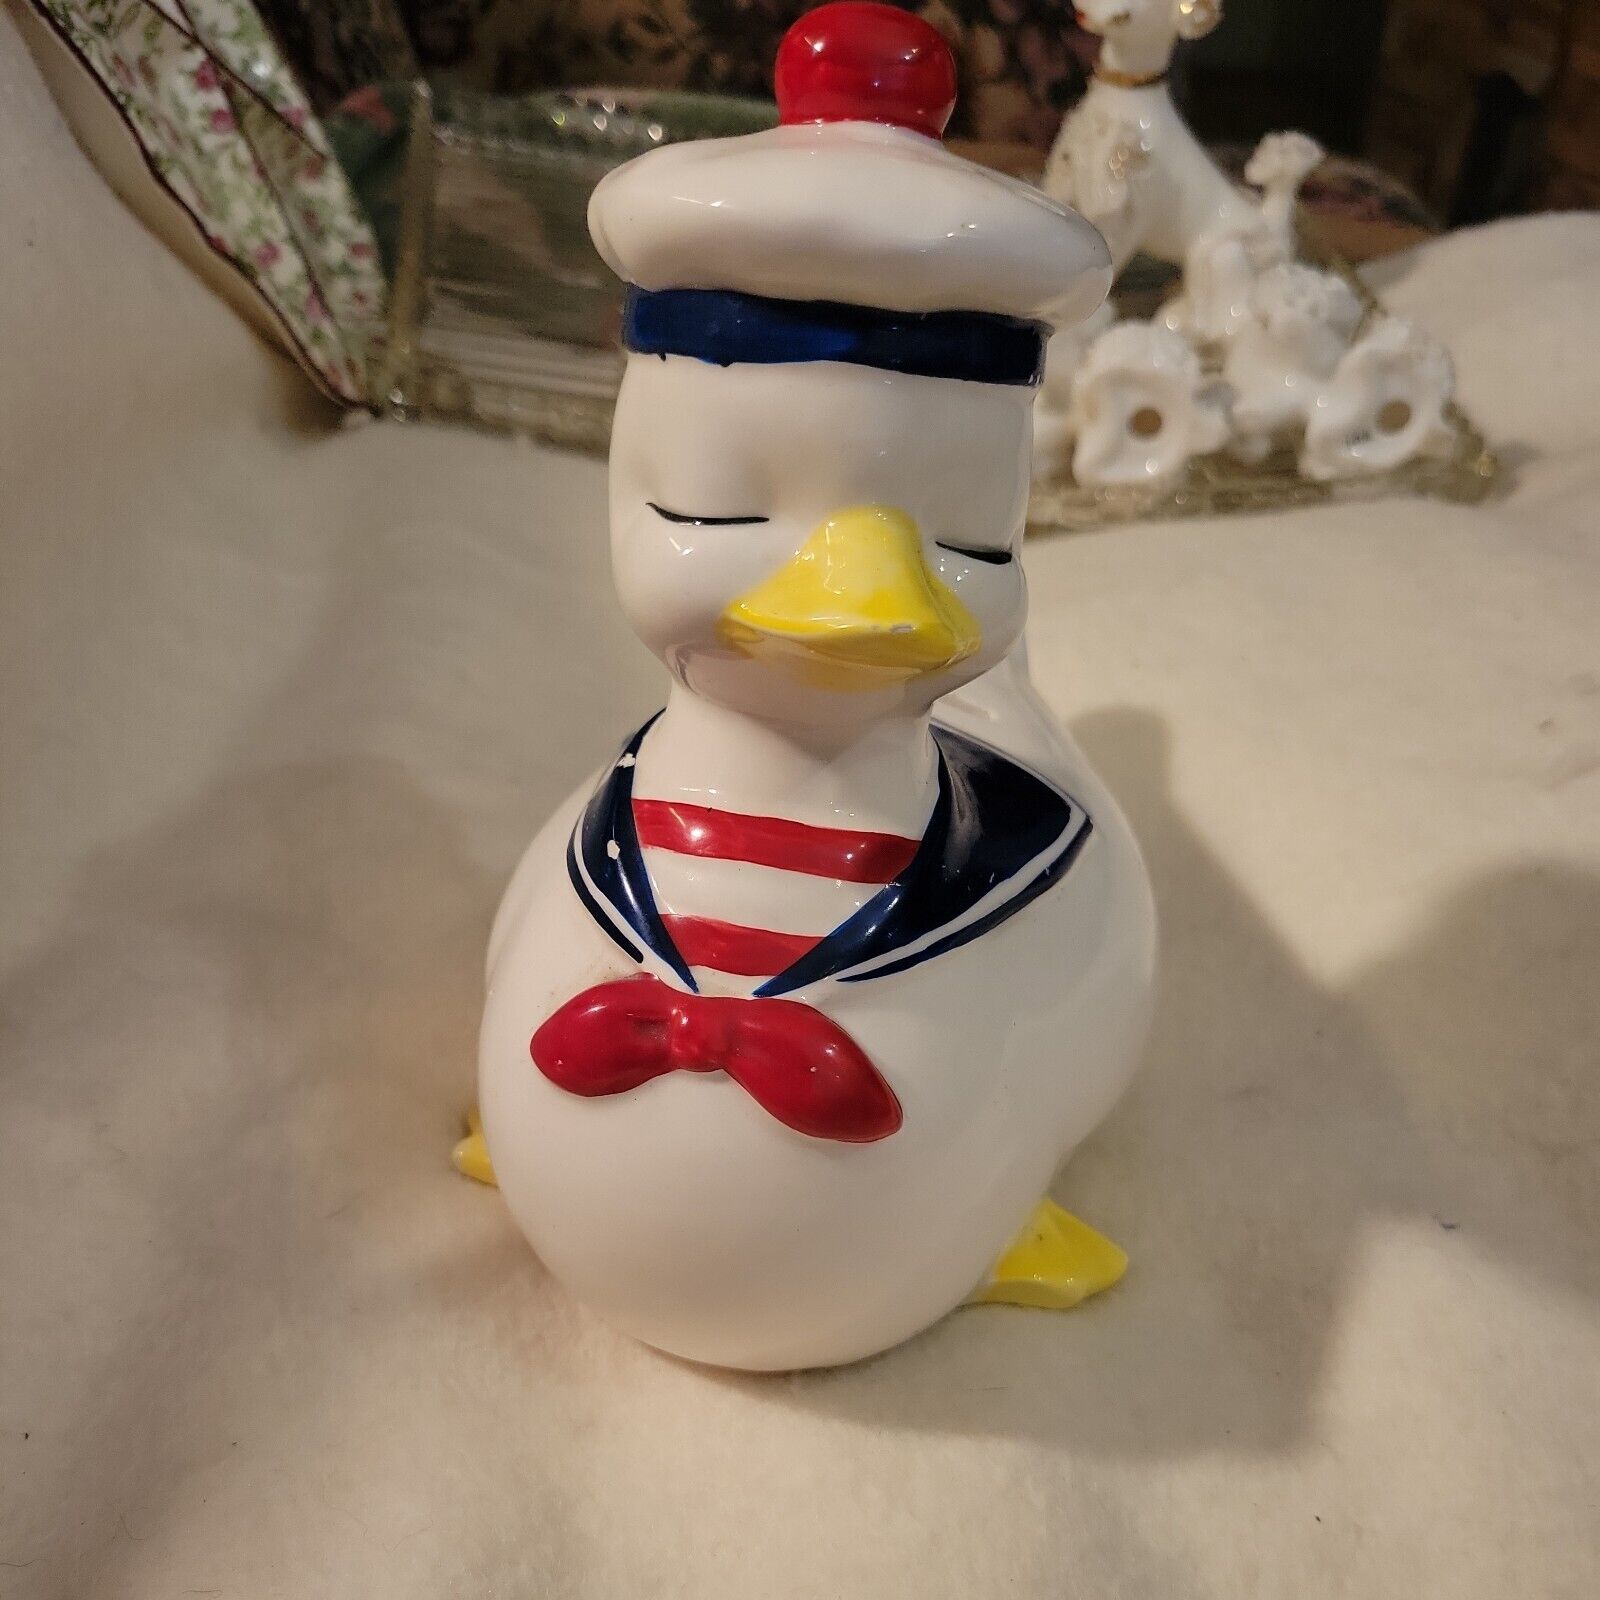 EMPRESS BY HARUTA HANDPAINTED SAILOR DUCK BANK. MISSING SOME PAINT.